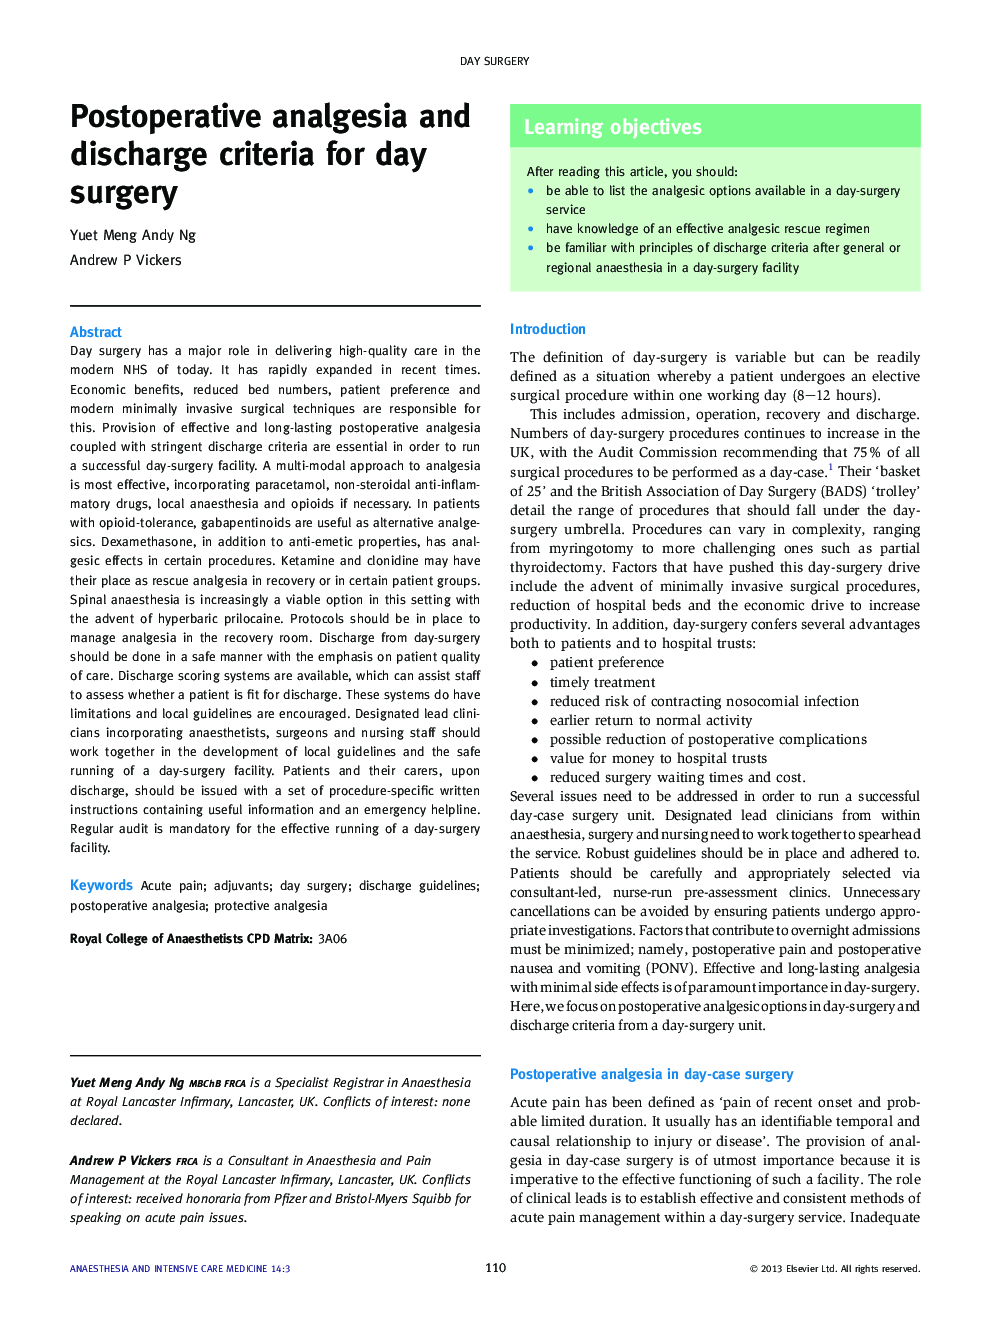 Postoperative analgesia and discharge criteria for day surgery